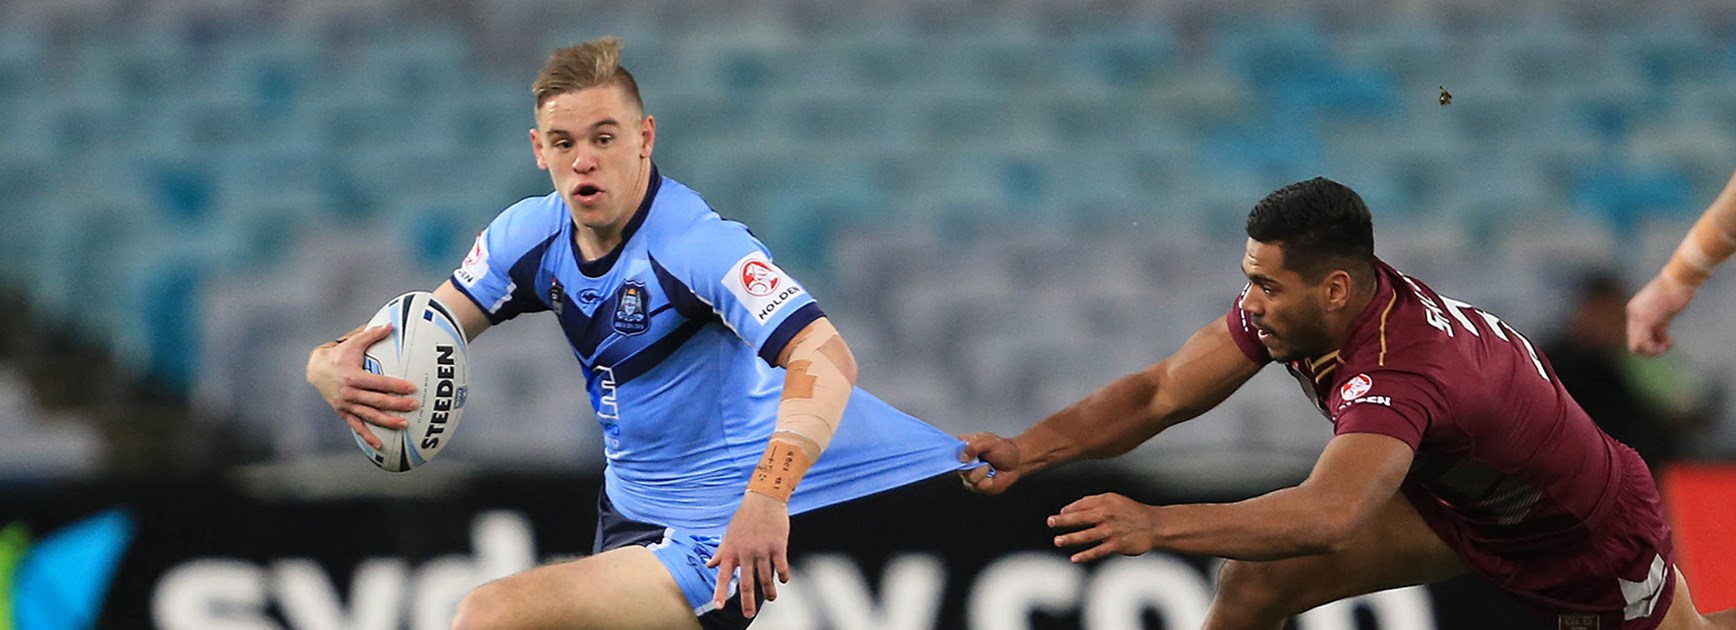 NSW proved too strong in the under 20s.